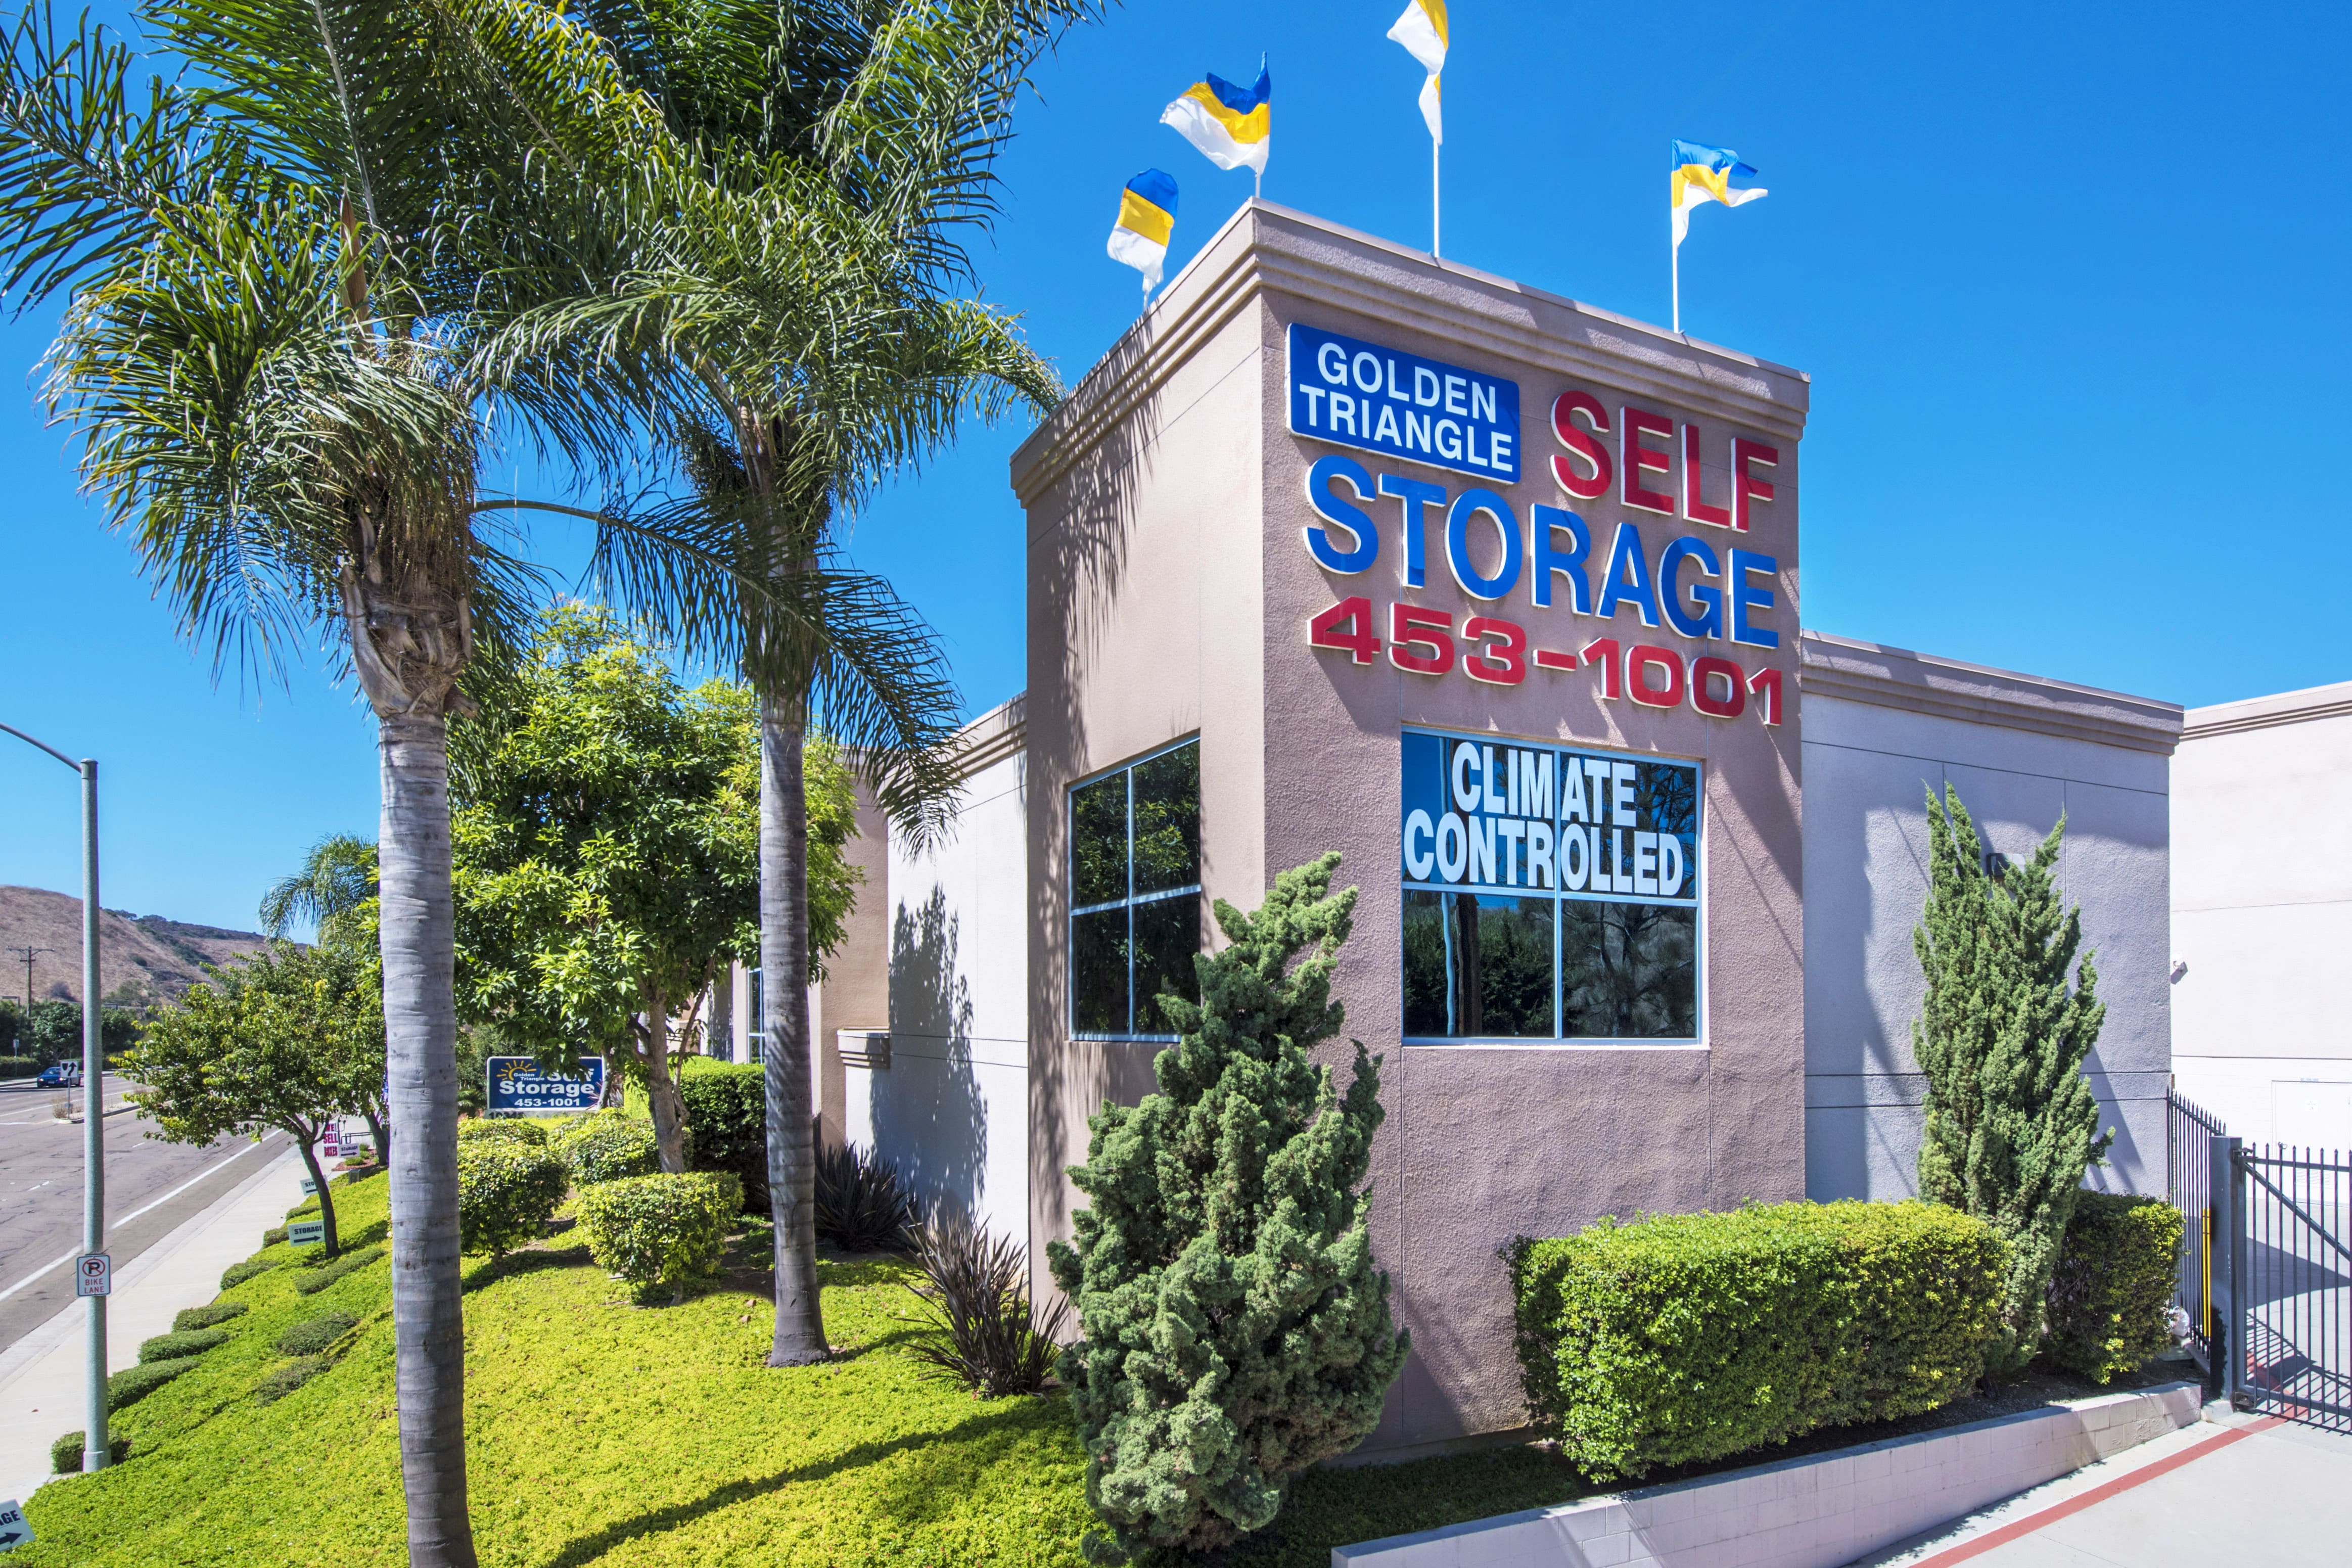 Building exterior at Golden Triangle Self Storage in San Diego, CA